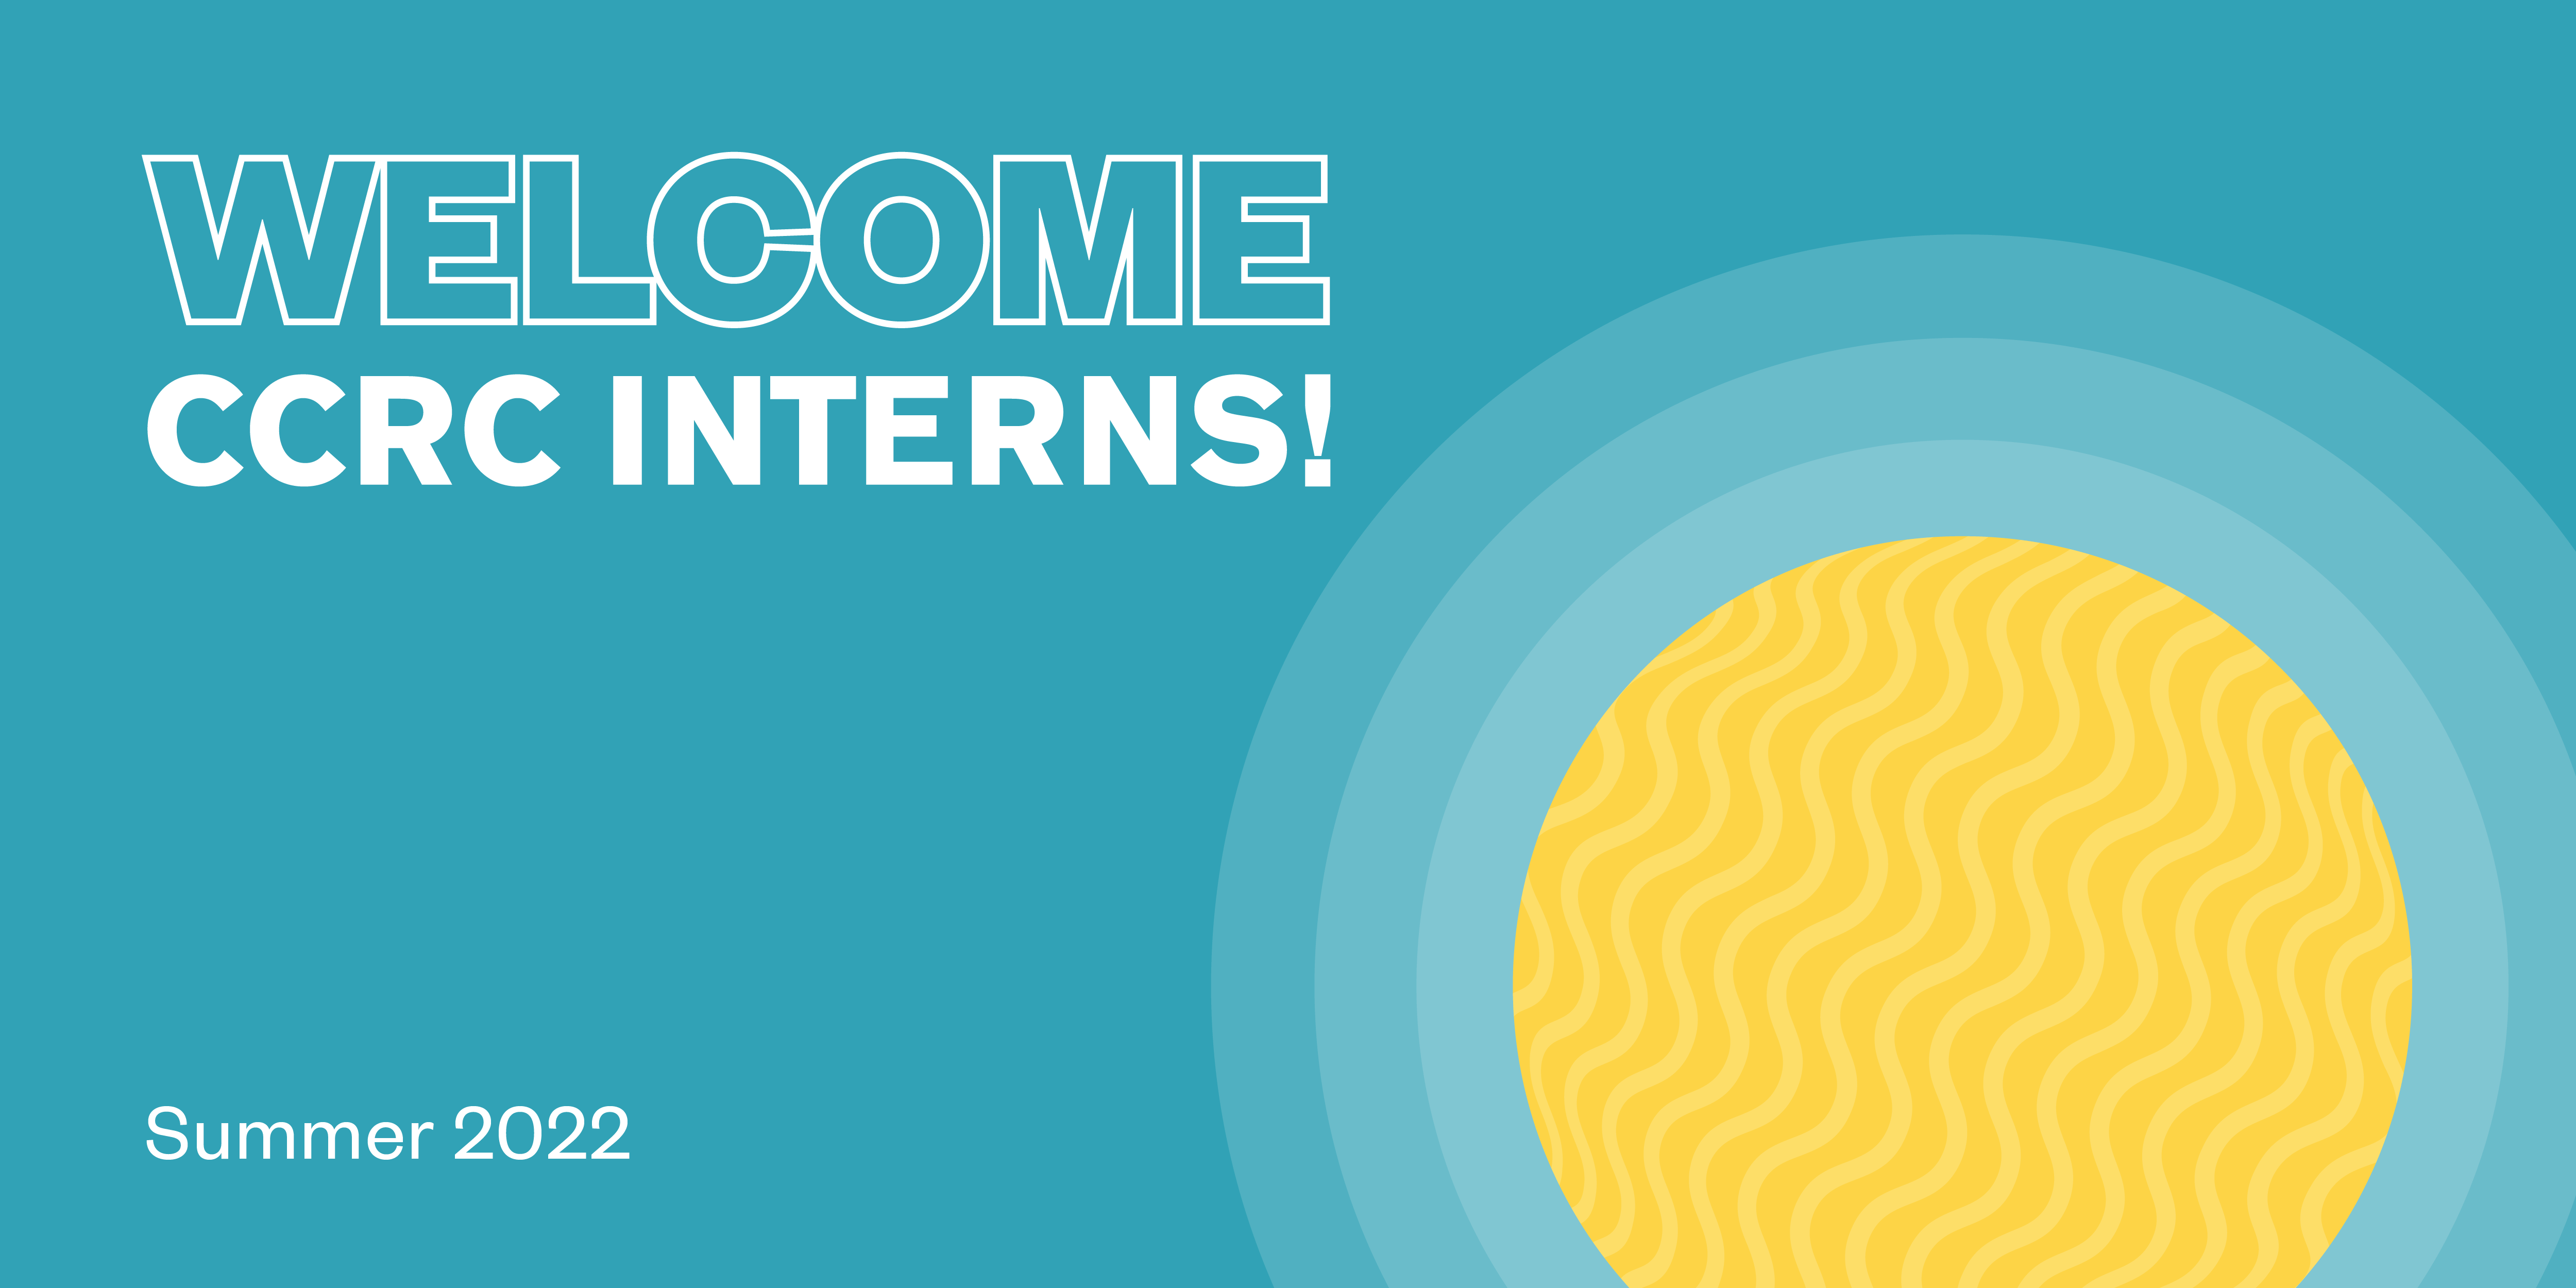 Intern welcome message with sun illustration.